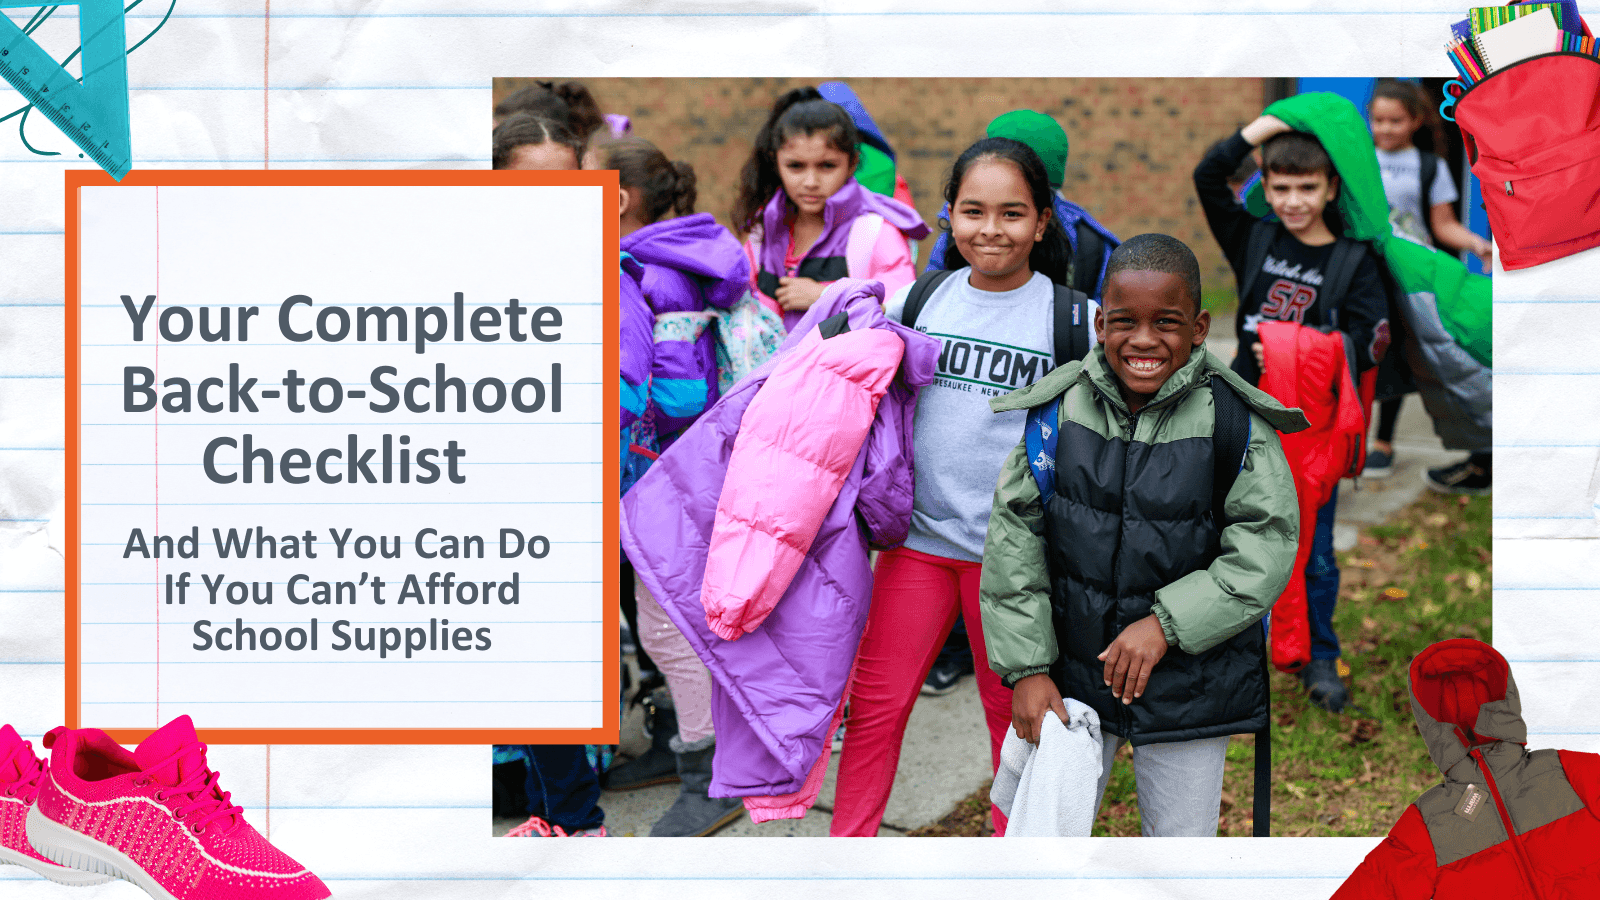 Your Complete Back-to-School Checklist (And What You Can Do If You